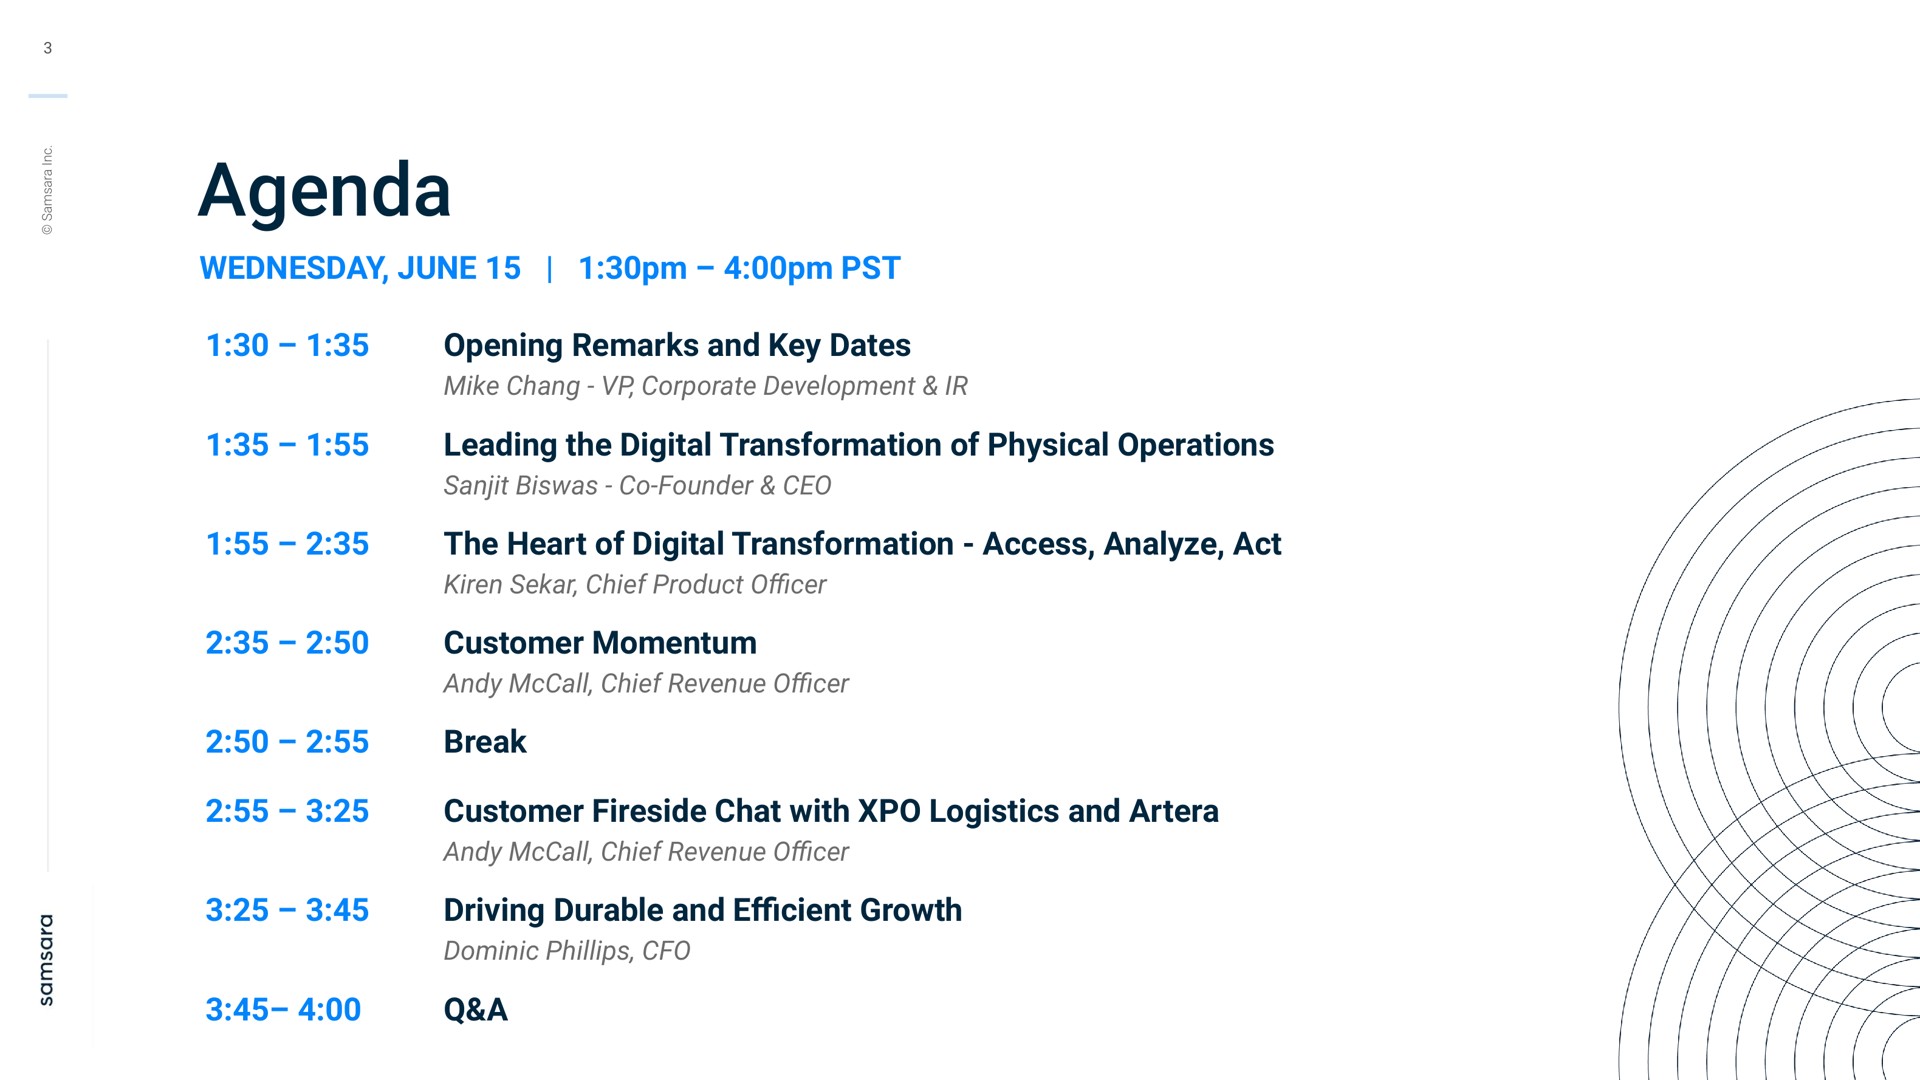 agenda june pst opening remarks and key dates mike chang corporate development leading the digital transformation of physical operations founder the heart of digital transformation access analyze act chief product customer momentum chief revenue break customer fireside chat with logistics and chief revenue driving durable and growth a | Samsara